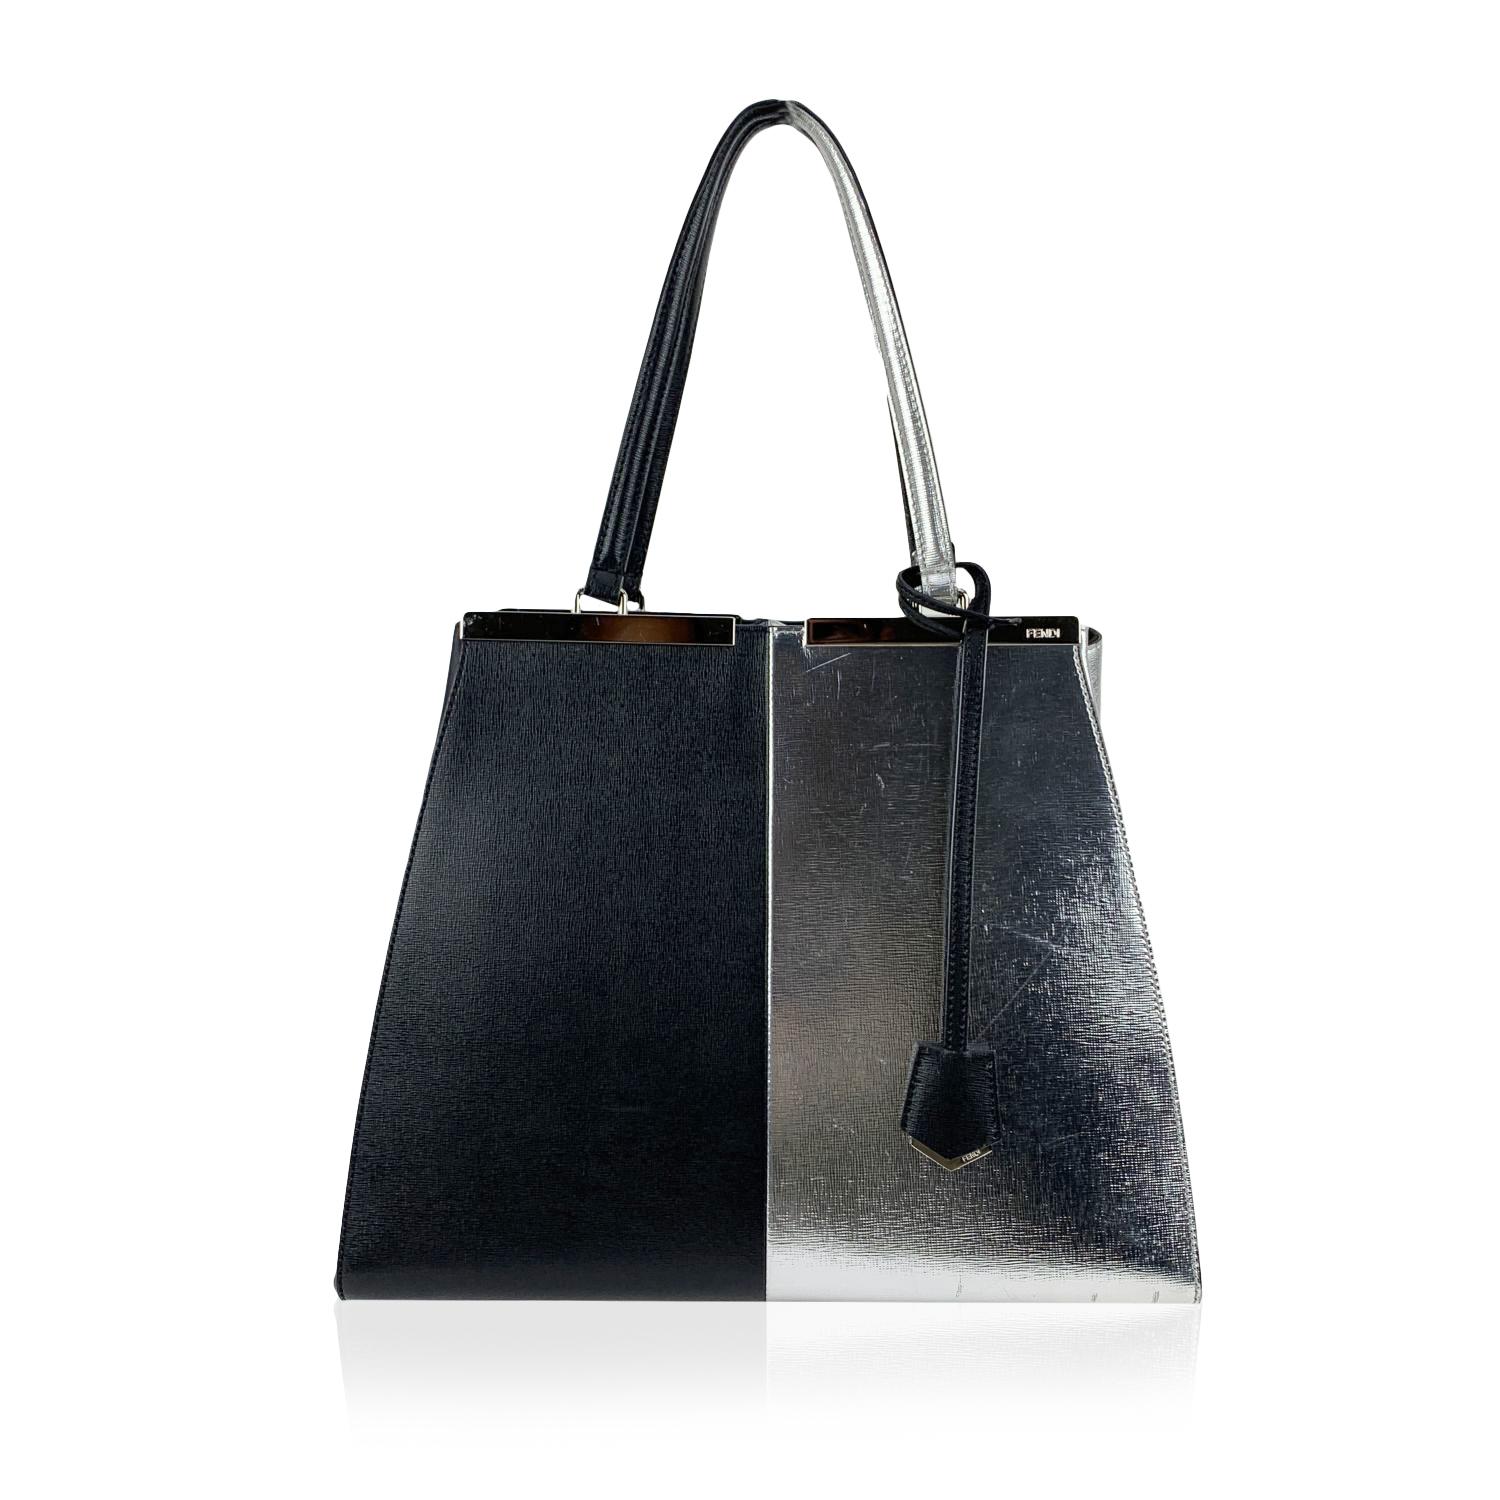 This beautiful Bag will come with a Certificate of Authenticity provided by Entrupy. The certificate will be provided at no further cost.

Fendi bicolor leather '3Jours' tote bag. Black and silver leather. Structured design and trapeze silhouette.